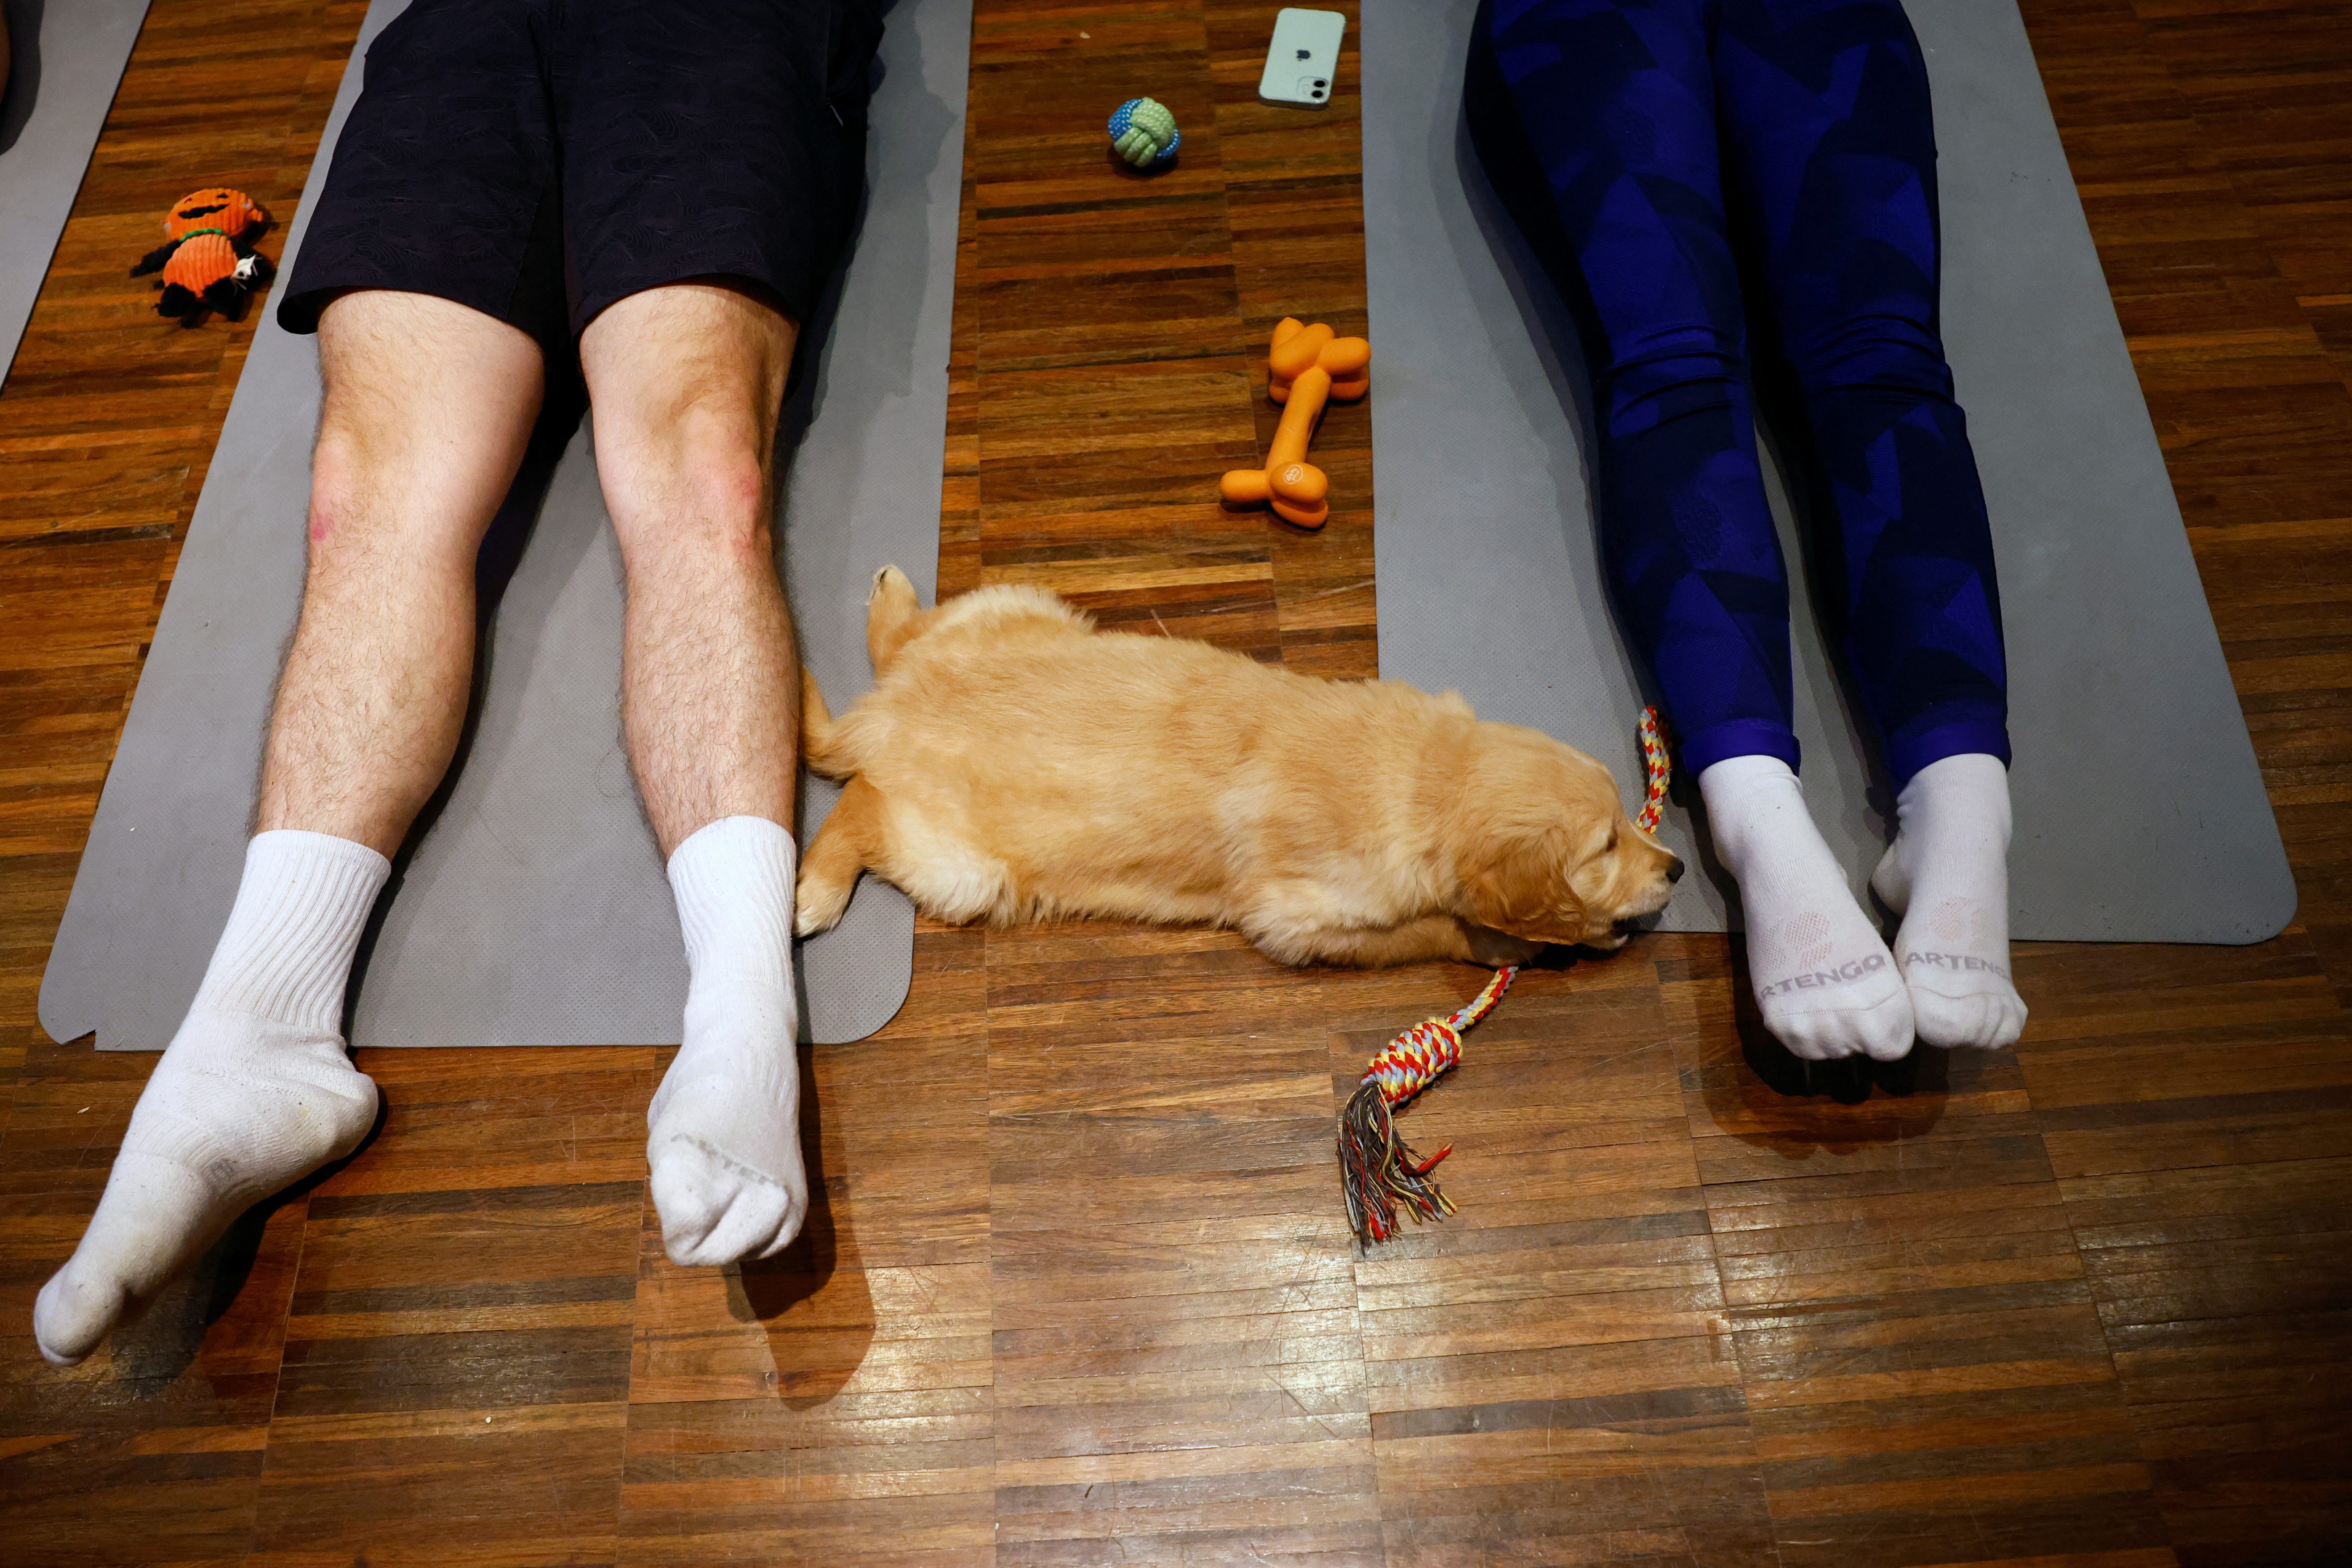 This New Studio Combines Our Two Favourite Things - Yoga And Dogs!